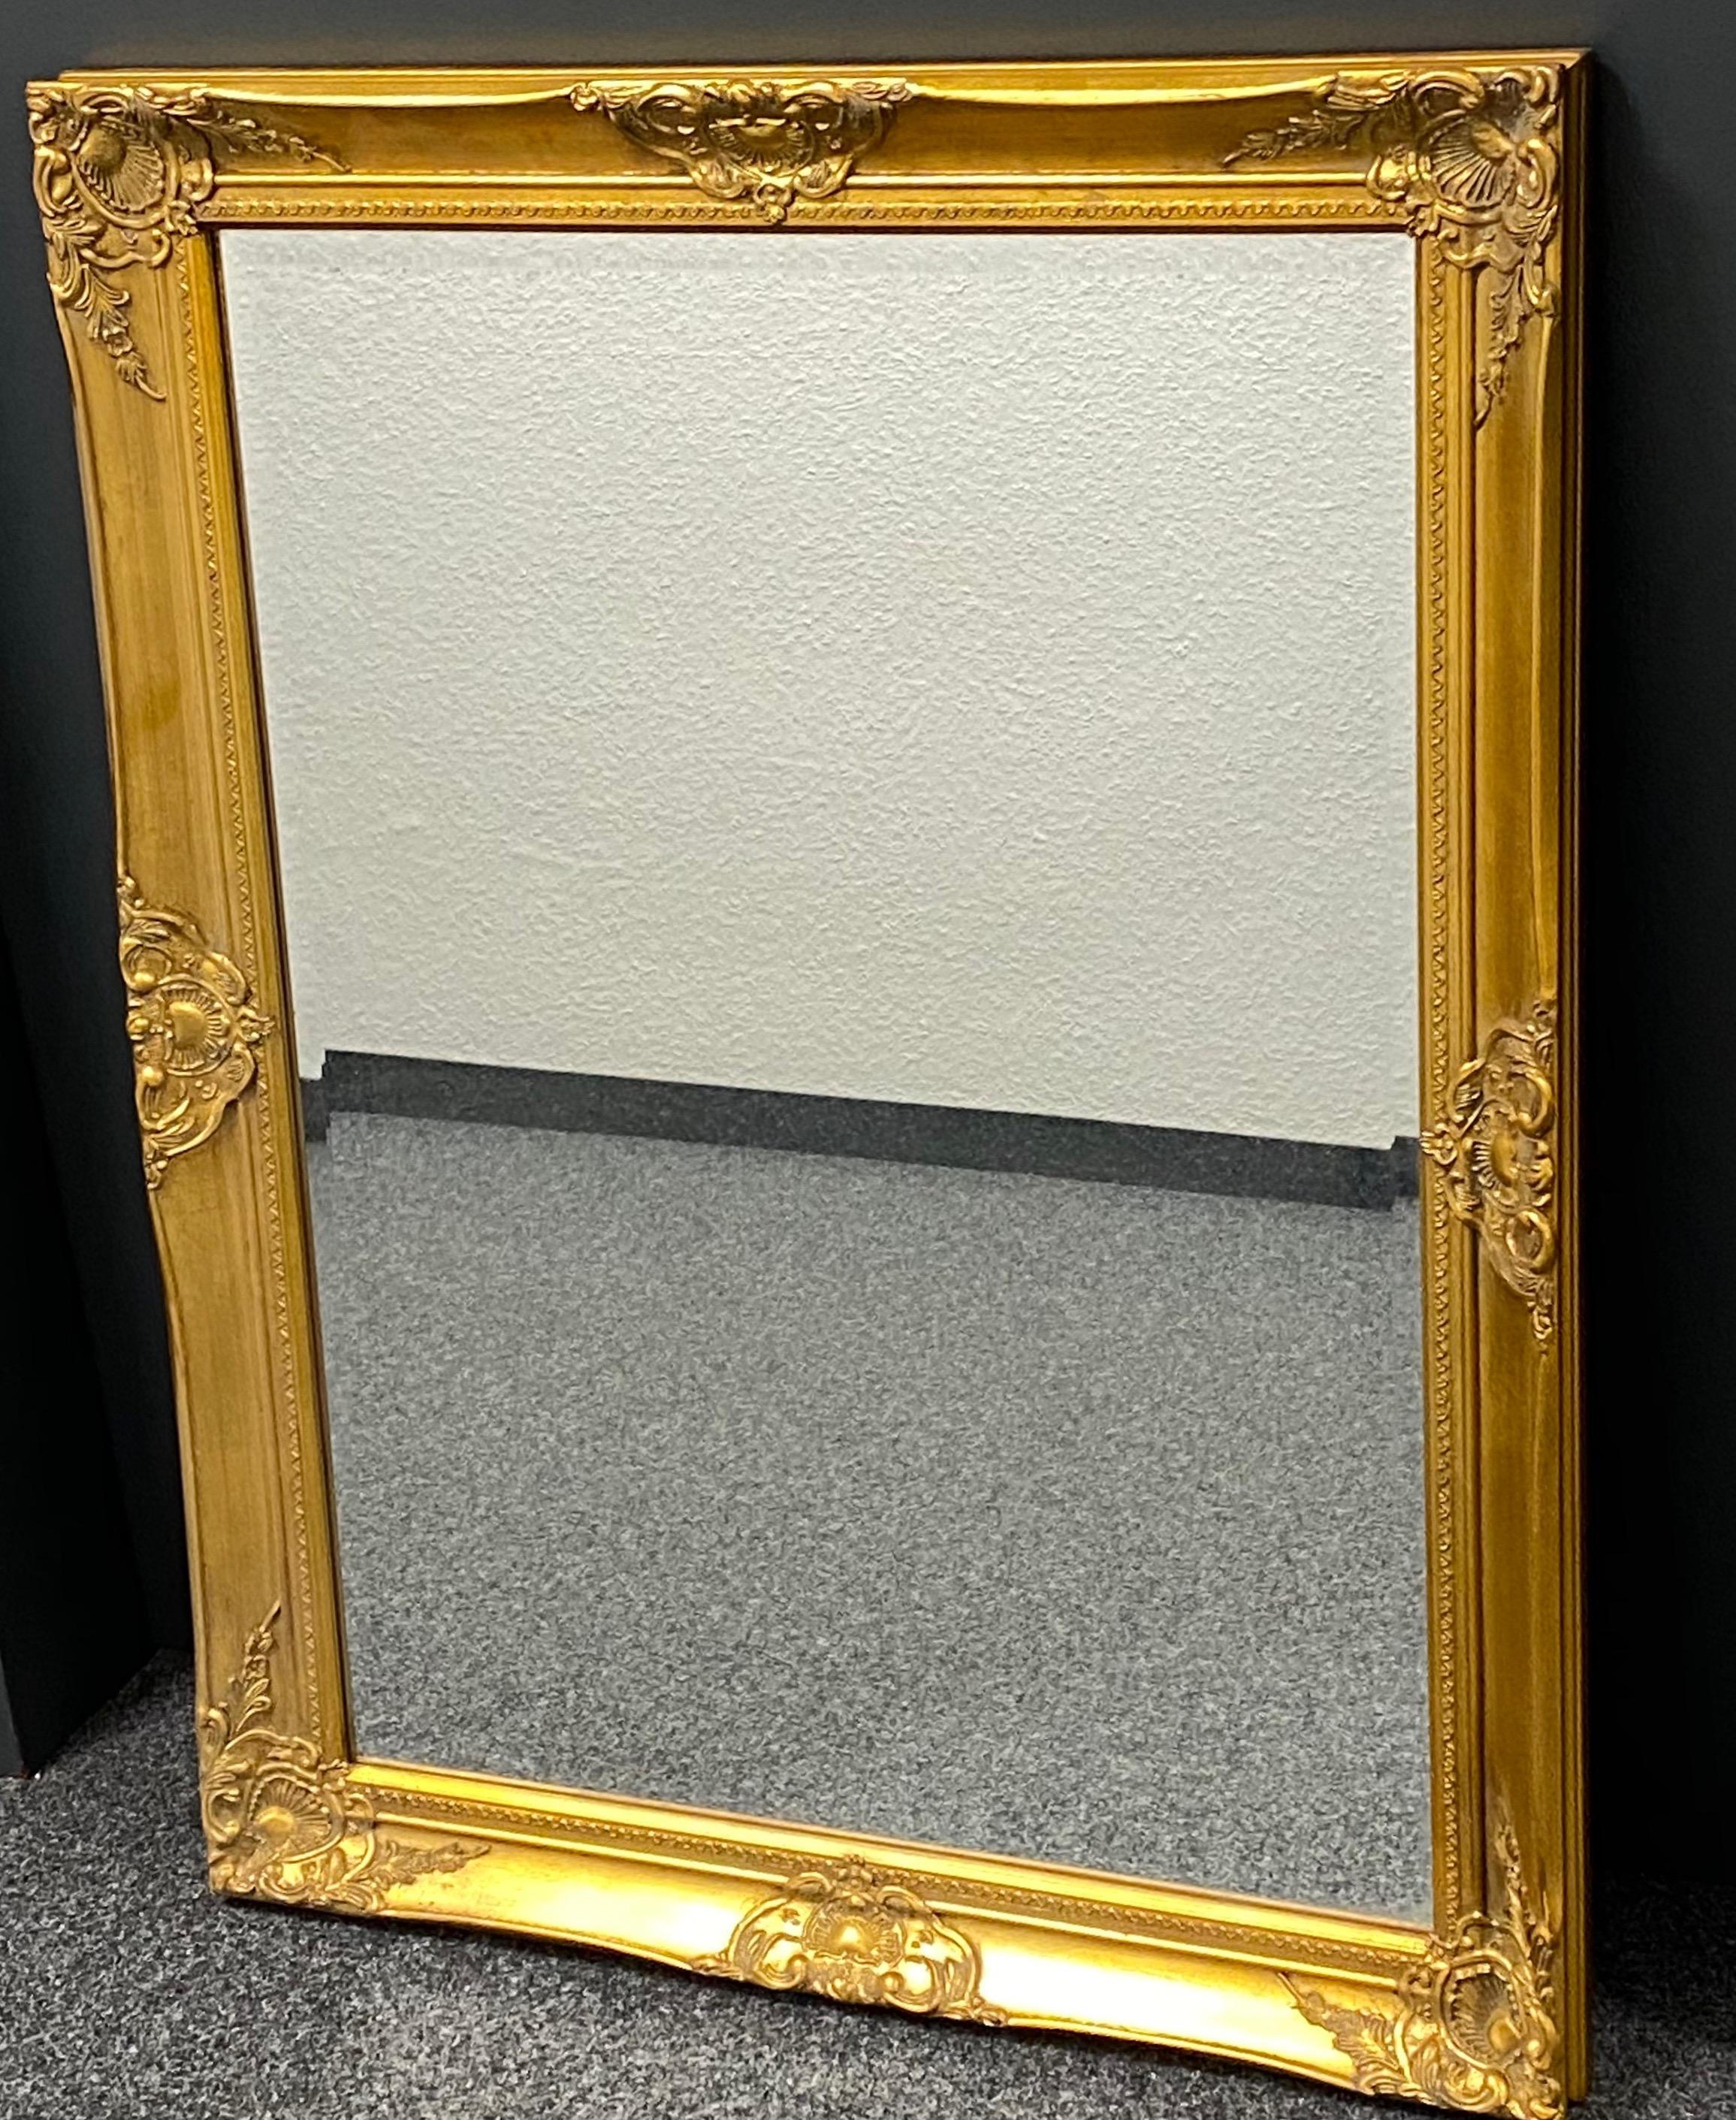 Stunning large Hollywood Regency style carved mirror. The giltwood frame surrounds a glass mirror. Made in Italy. Can be hung in vertical or horizontal way.